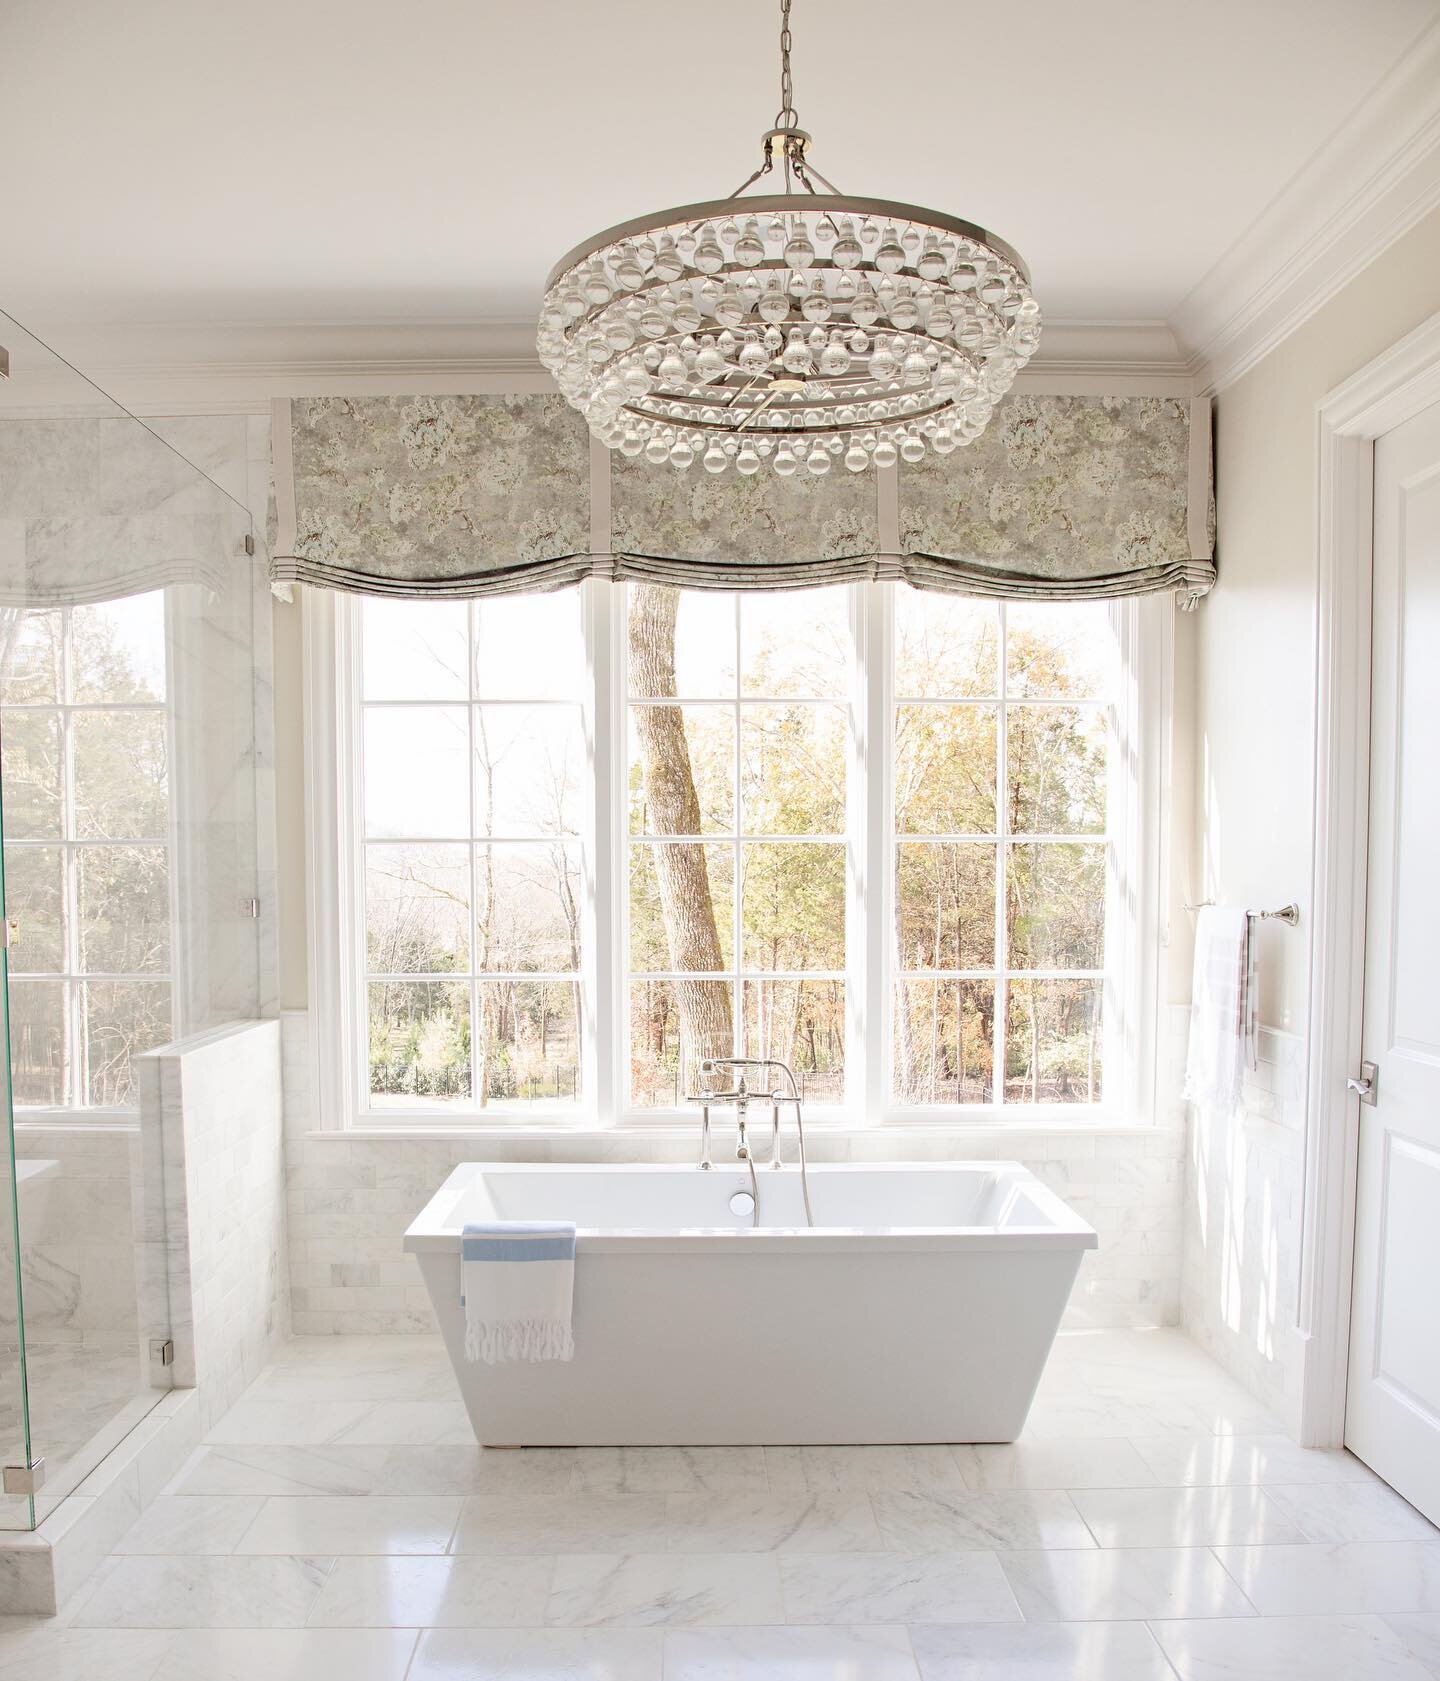 This master bathroom may always be at the top of my favorites list.  Tumbled marble, crystal chandelier, and lots of lot. 🥰. Photo by @kmosleyphotography  #traditionalhome #masterbathroomdesign #marbletile